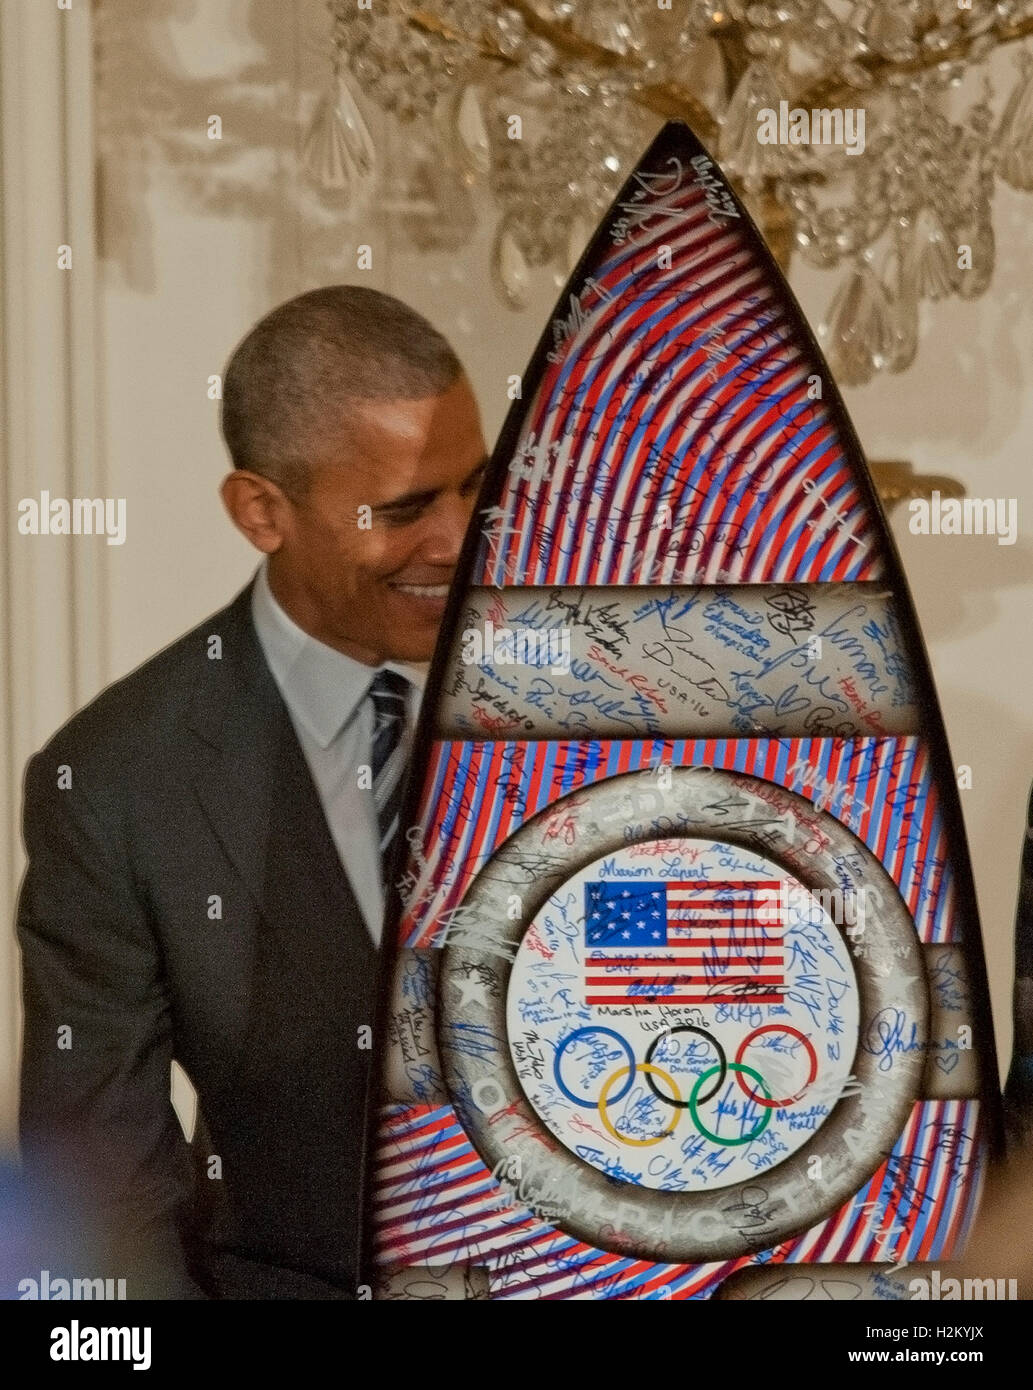 Washington DC, September 29, 2016, USA:  President Barack Obama welcomes the 2016 Summer Olympic Team to the White House and leans against a surfboard signed by the entire 2016 US Olympic team.  Patsy Lynch/MediaPunch Stock Photo